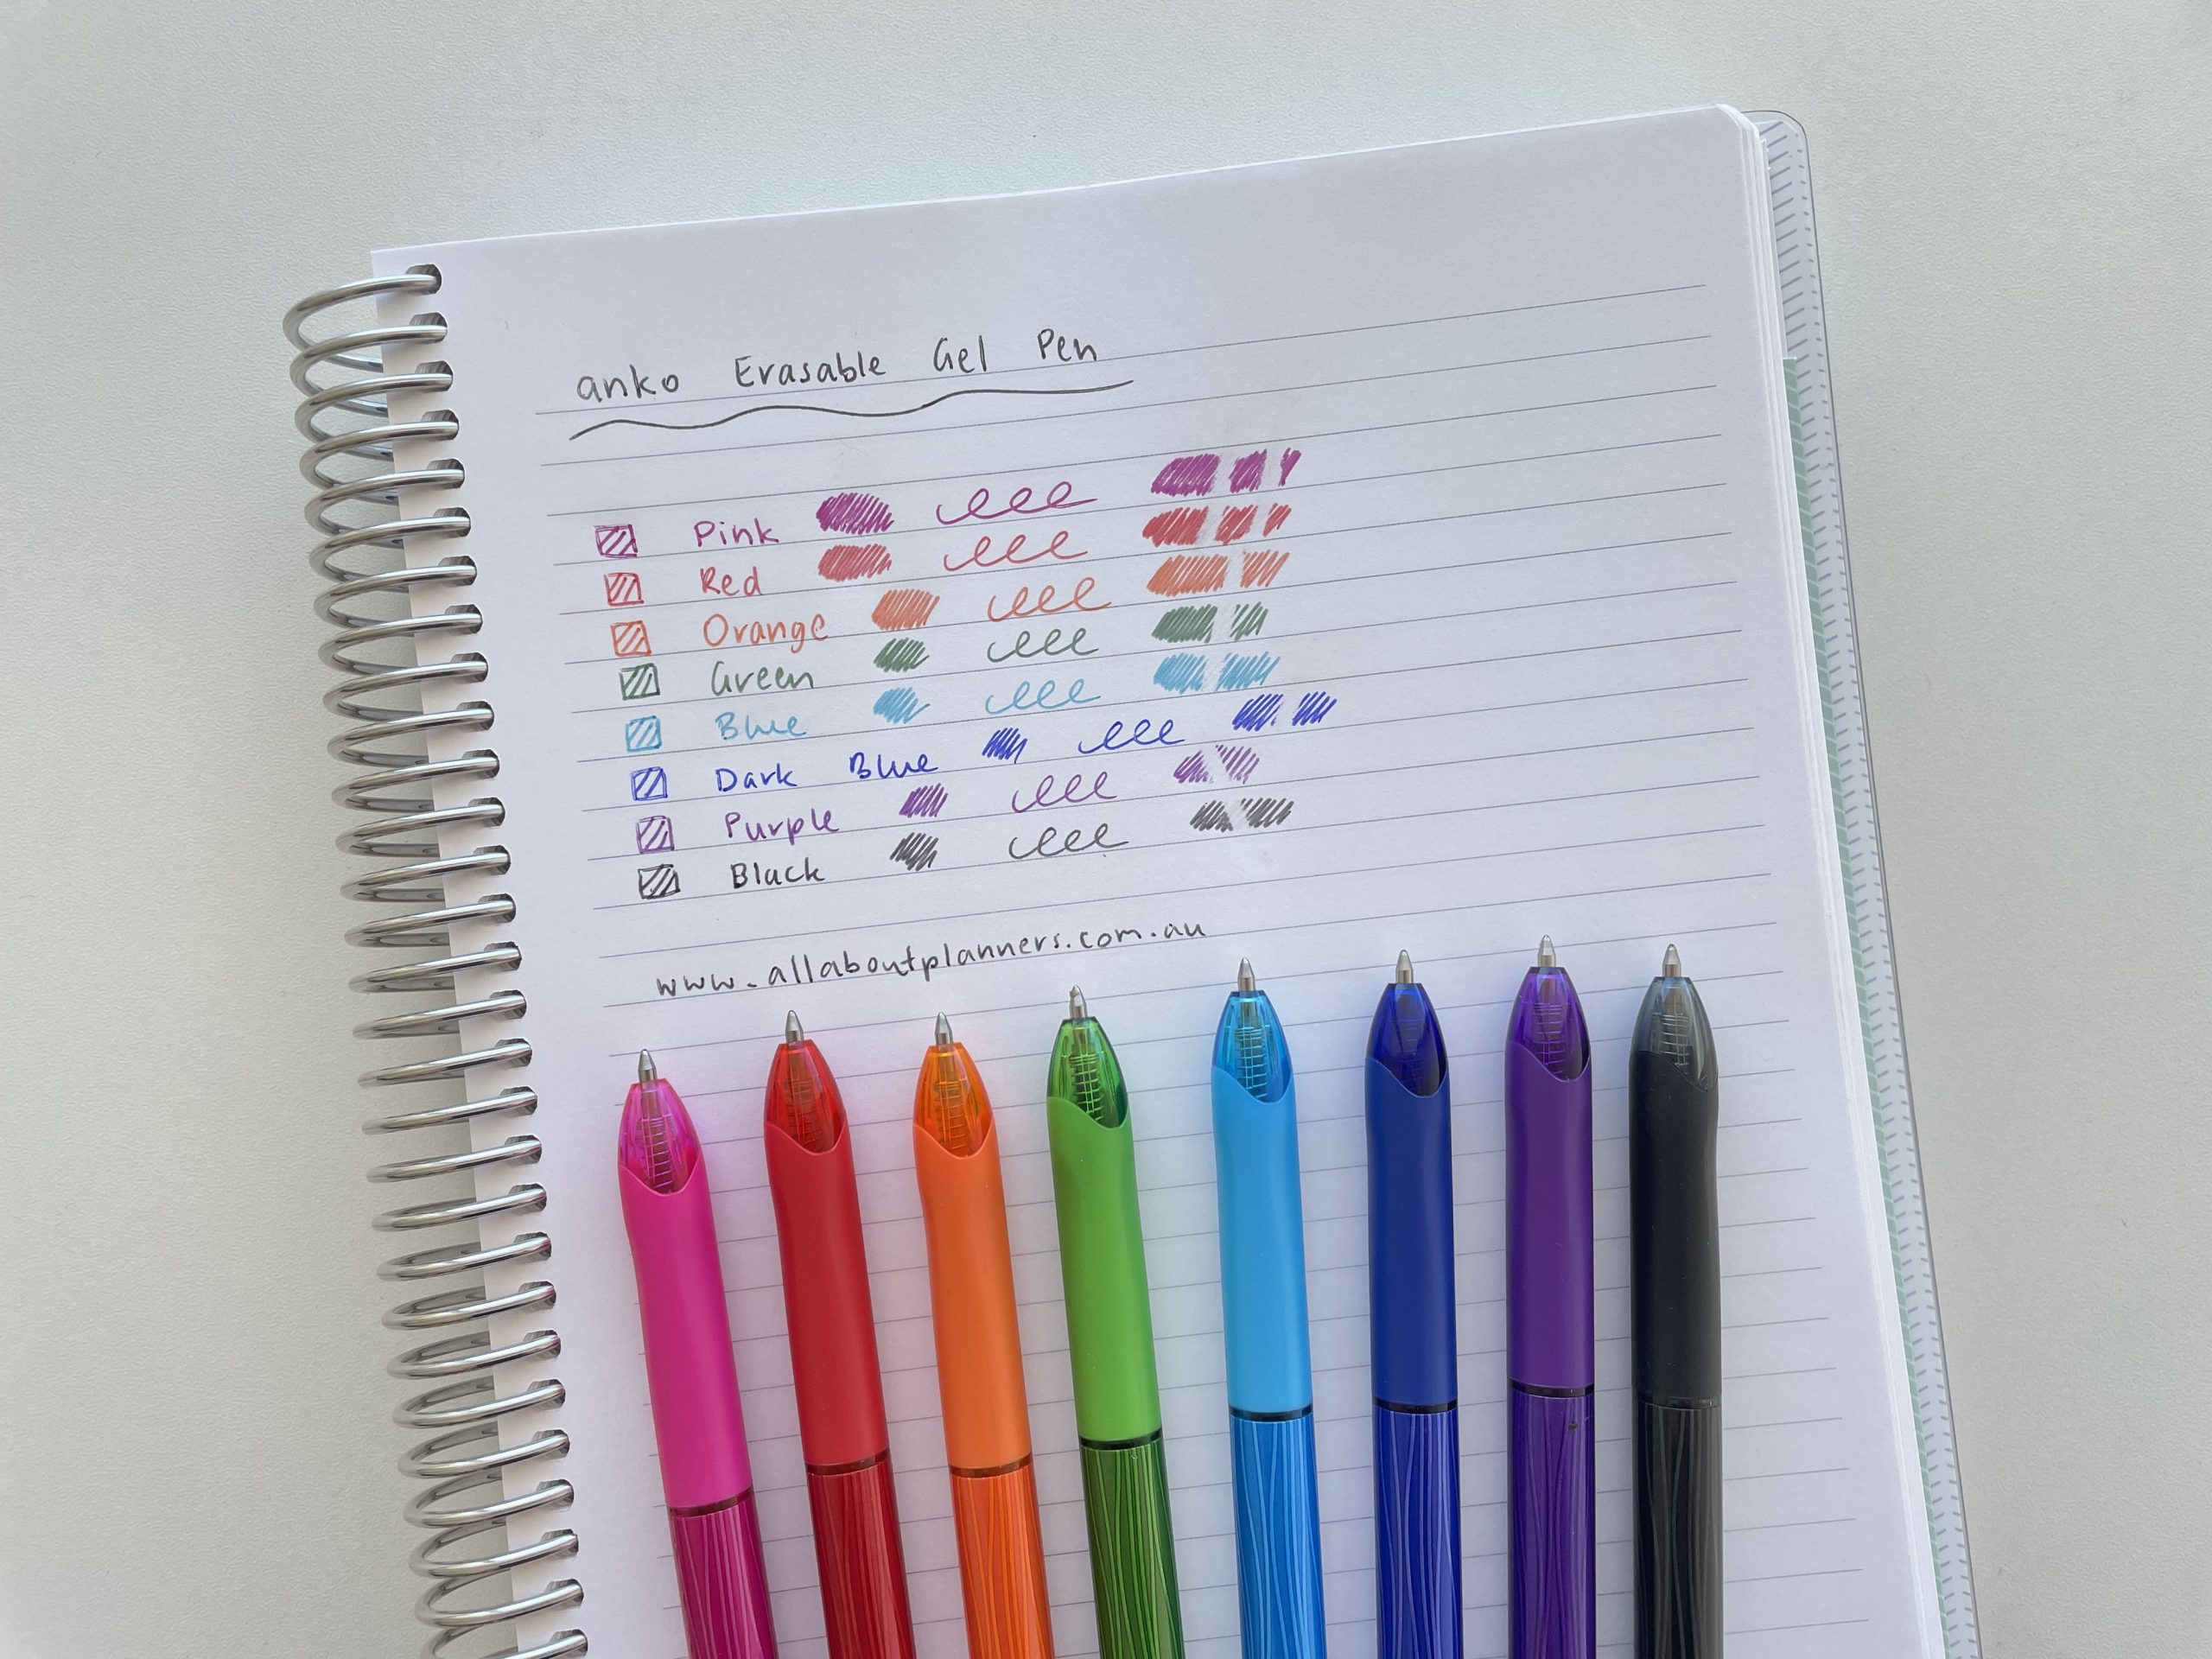 anko erasable gel pen review rainbow comparison with frixion erasable parkoo is cheap kmart stationery worth it